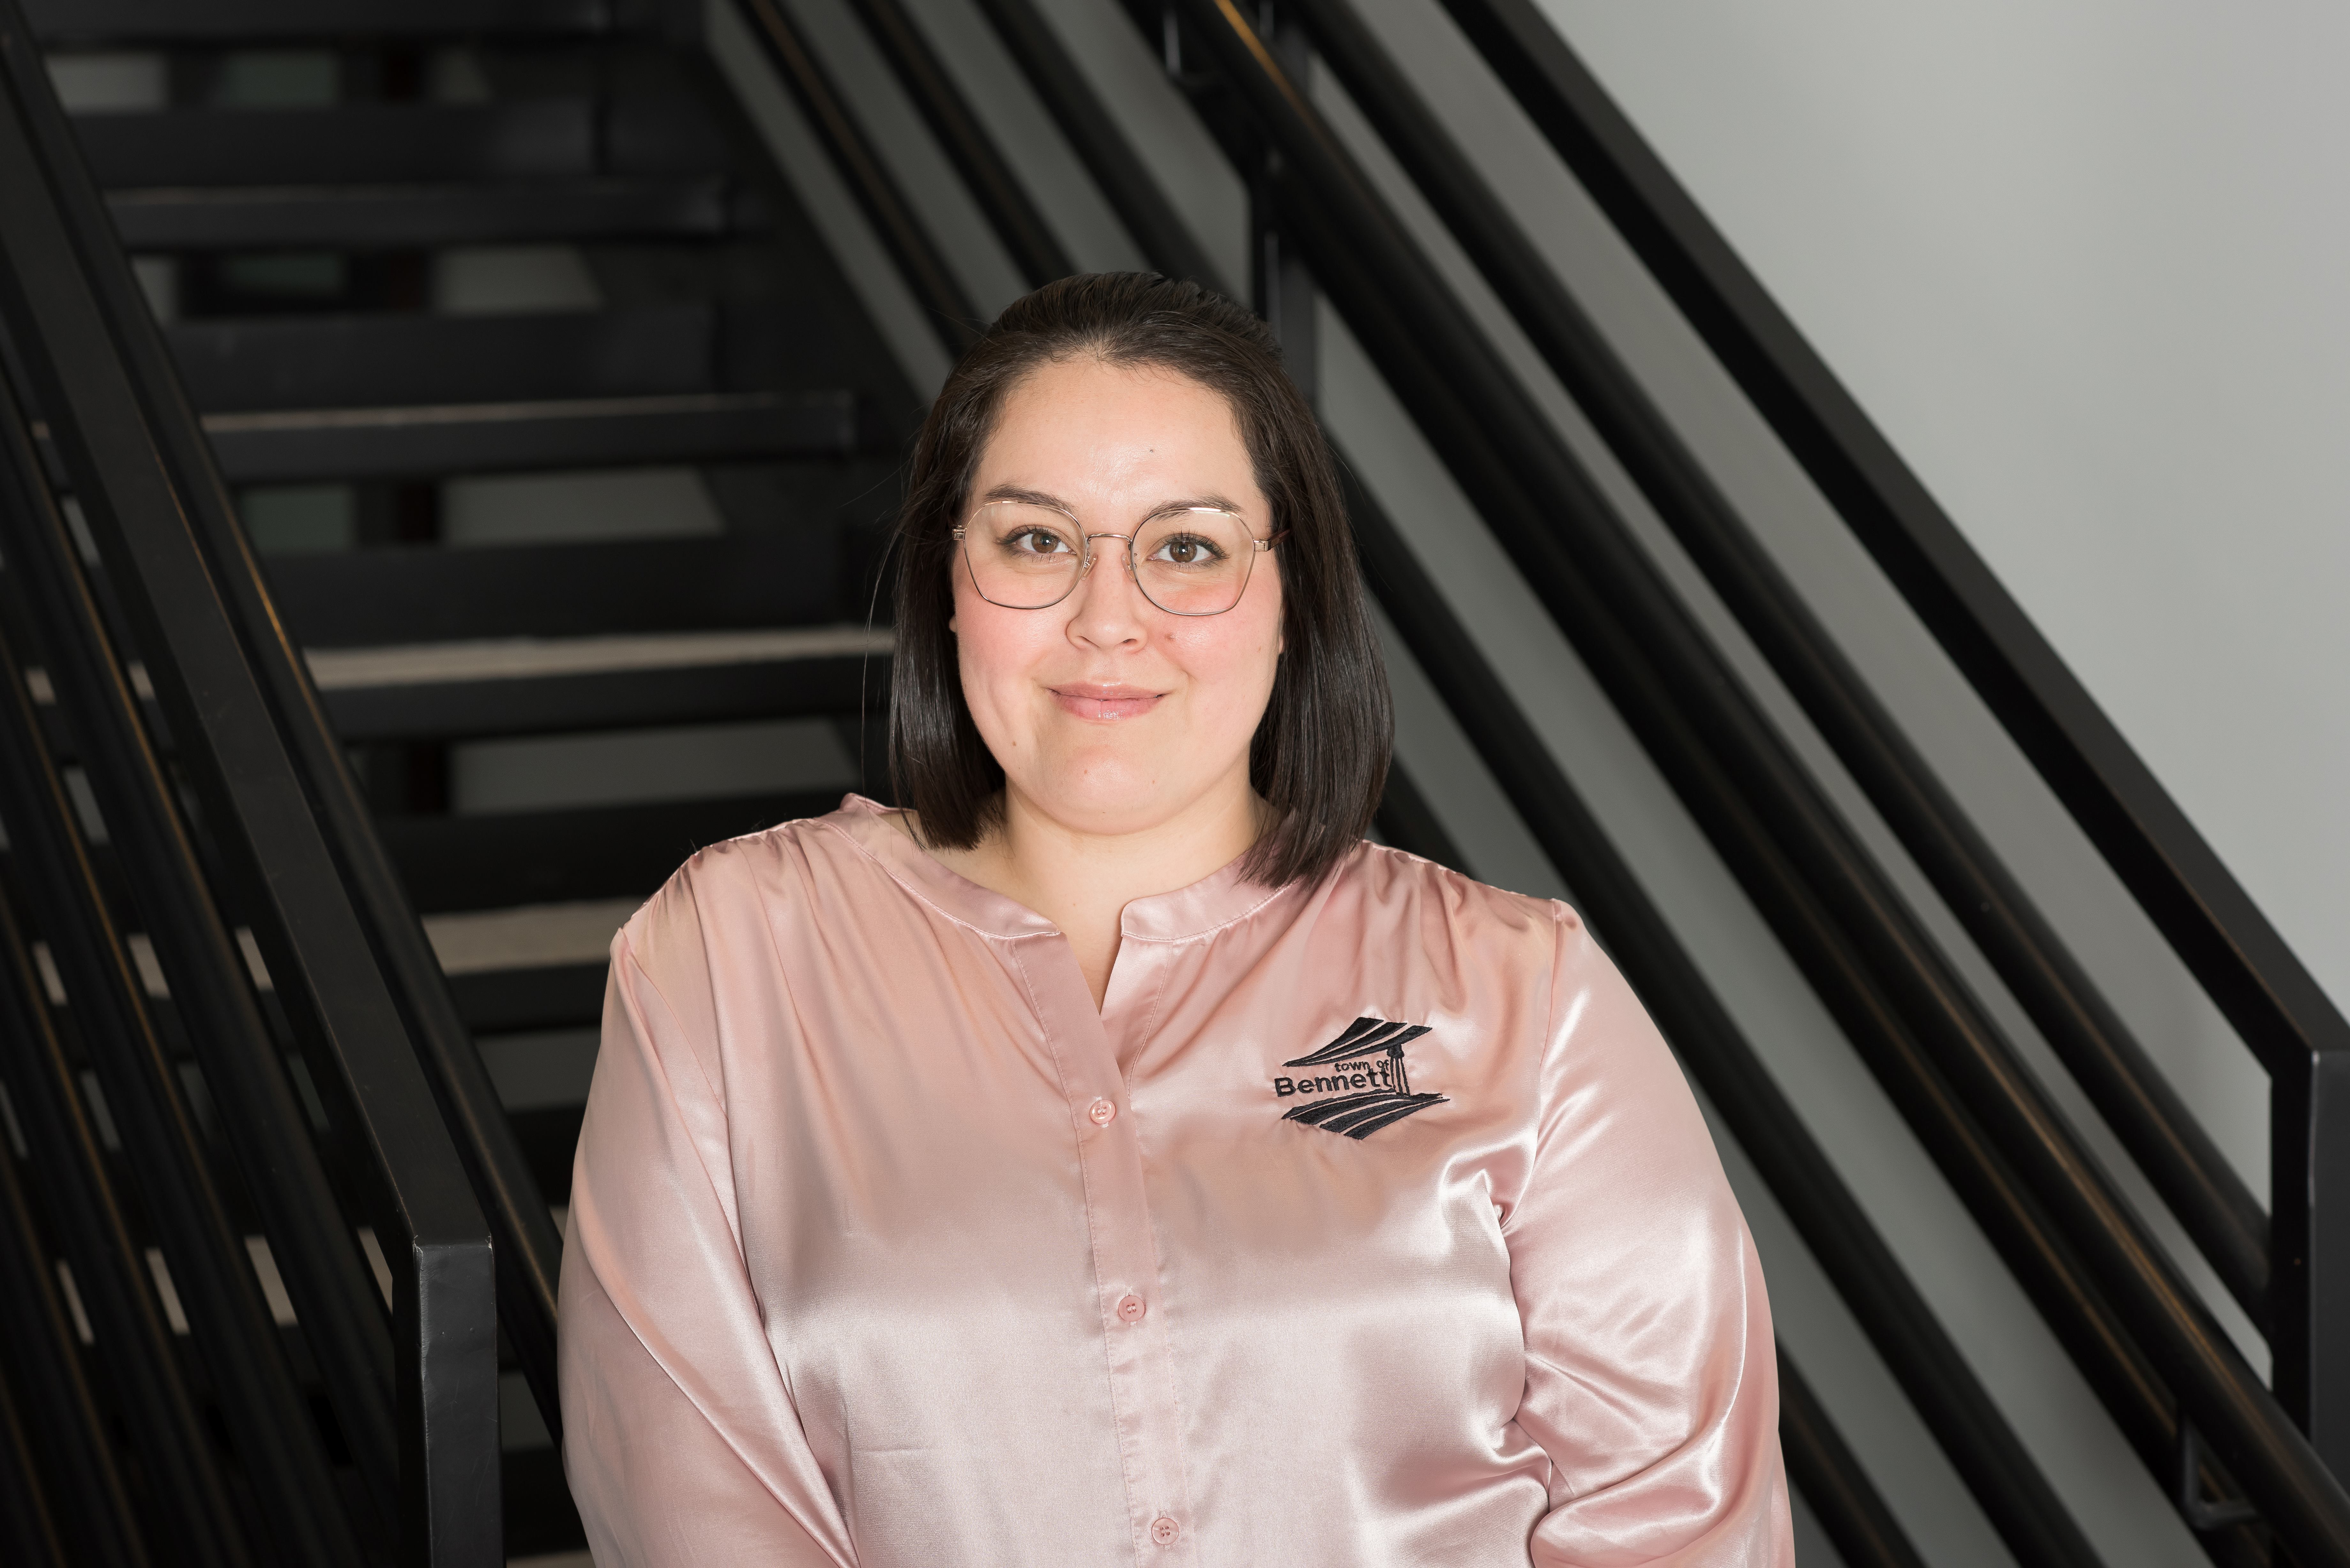 woman with glasses wearing a light pink shirt standing by stairs